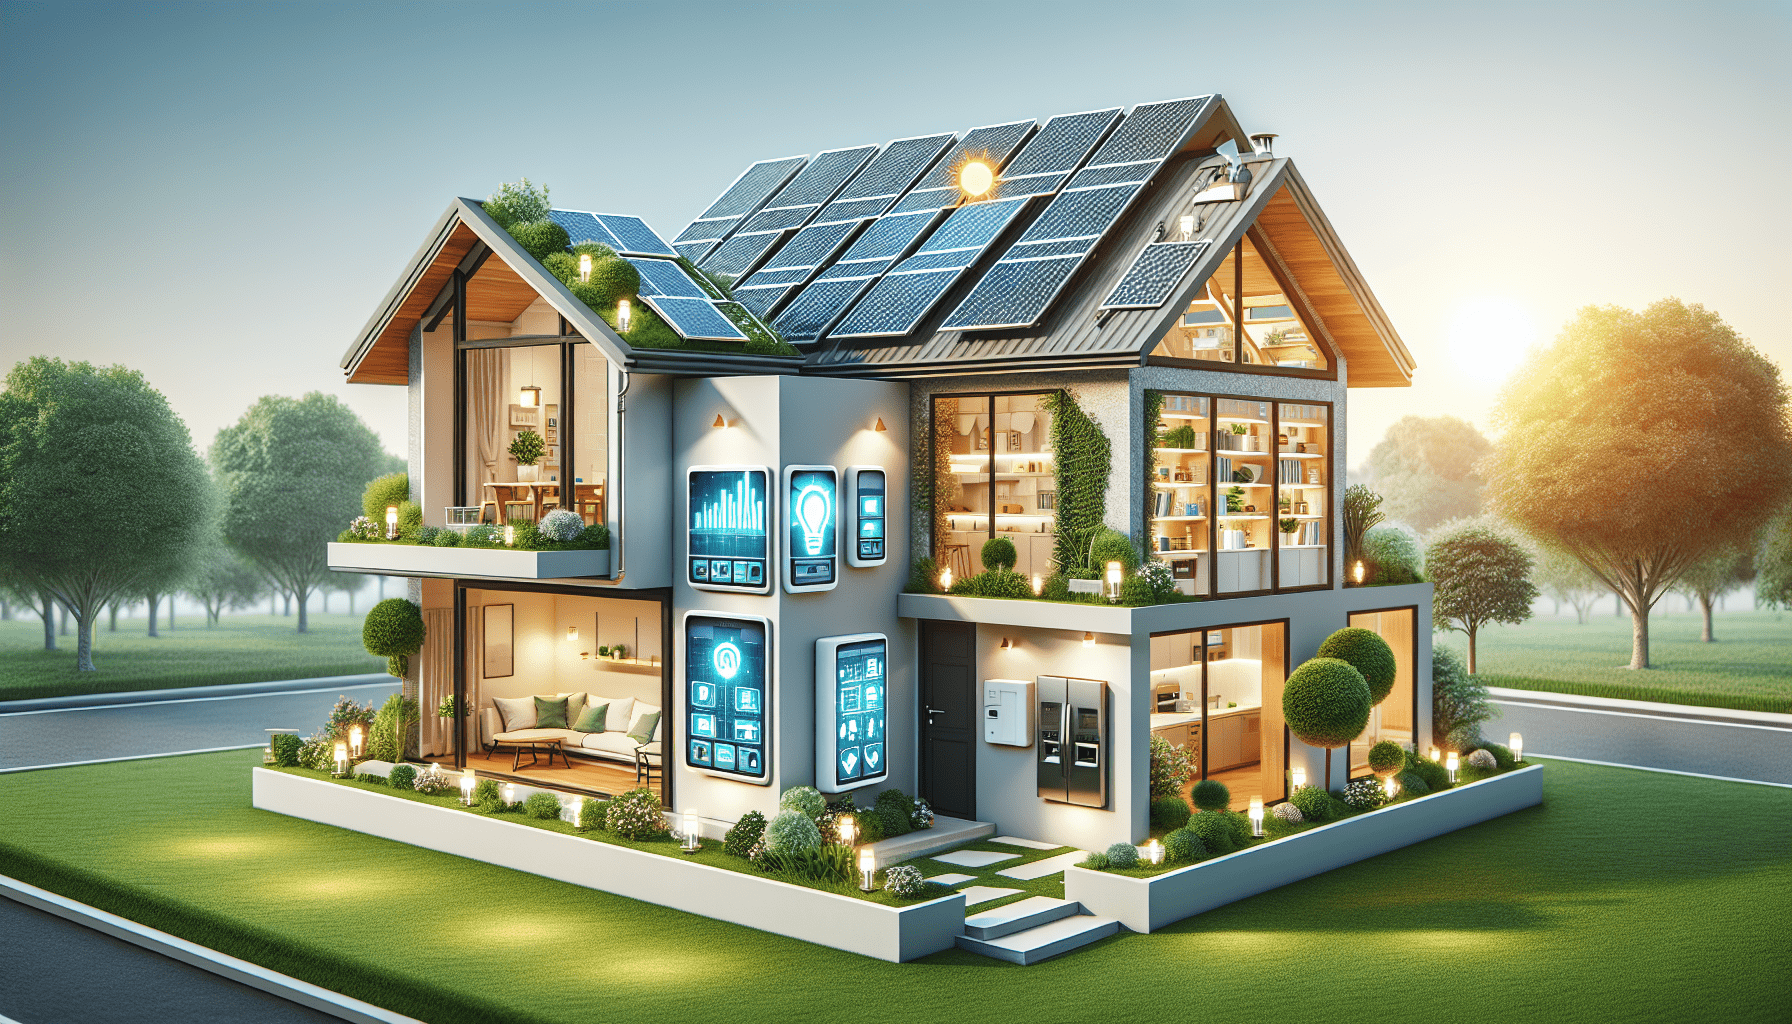 How Can I Make My Home More Energy-efficient?